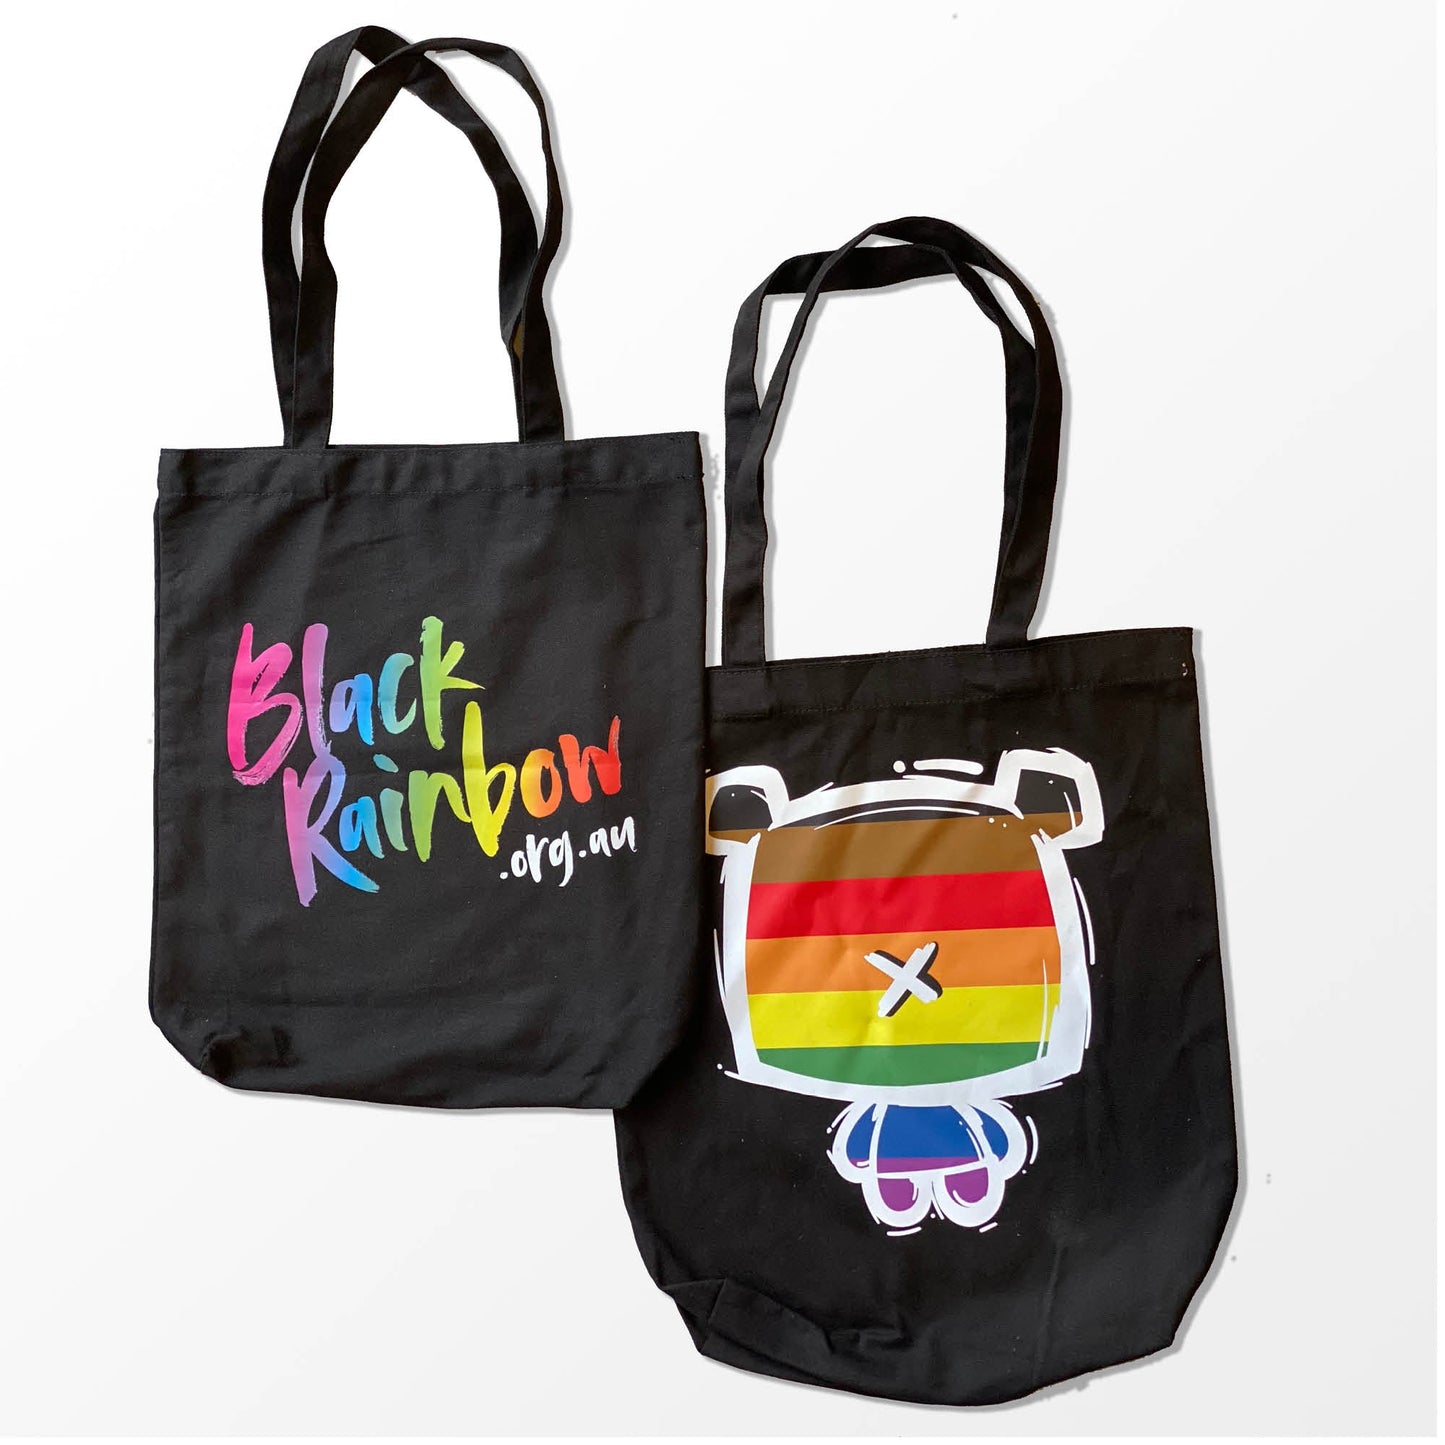 Black Rainbow Tote Bag + Free Assorted Badges and Stickers